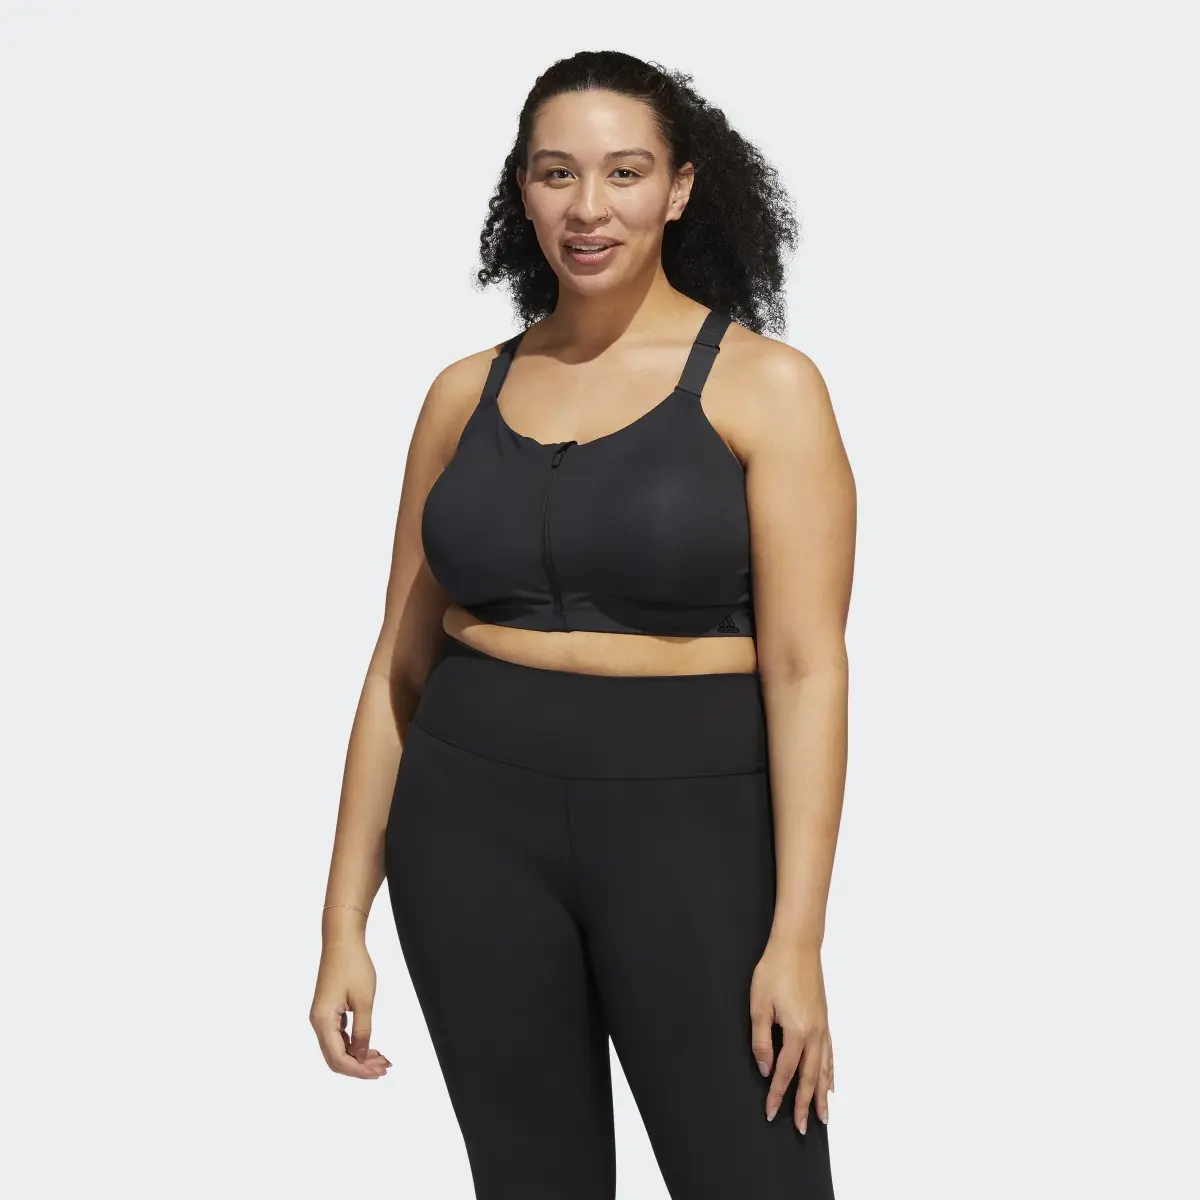 Adidas Brassière adidas TLRD Impact Luxe Training Maintien fort (Grandes tailles). 2